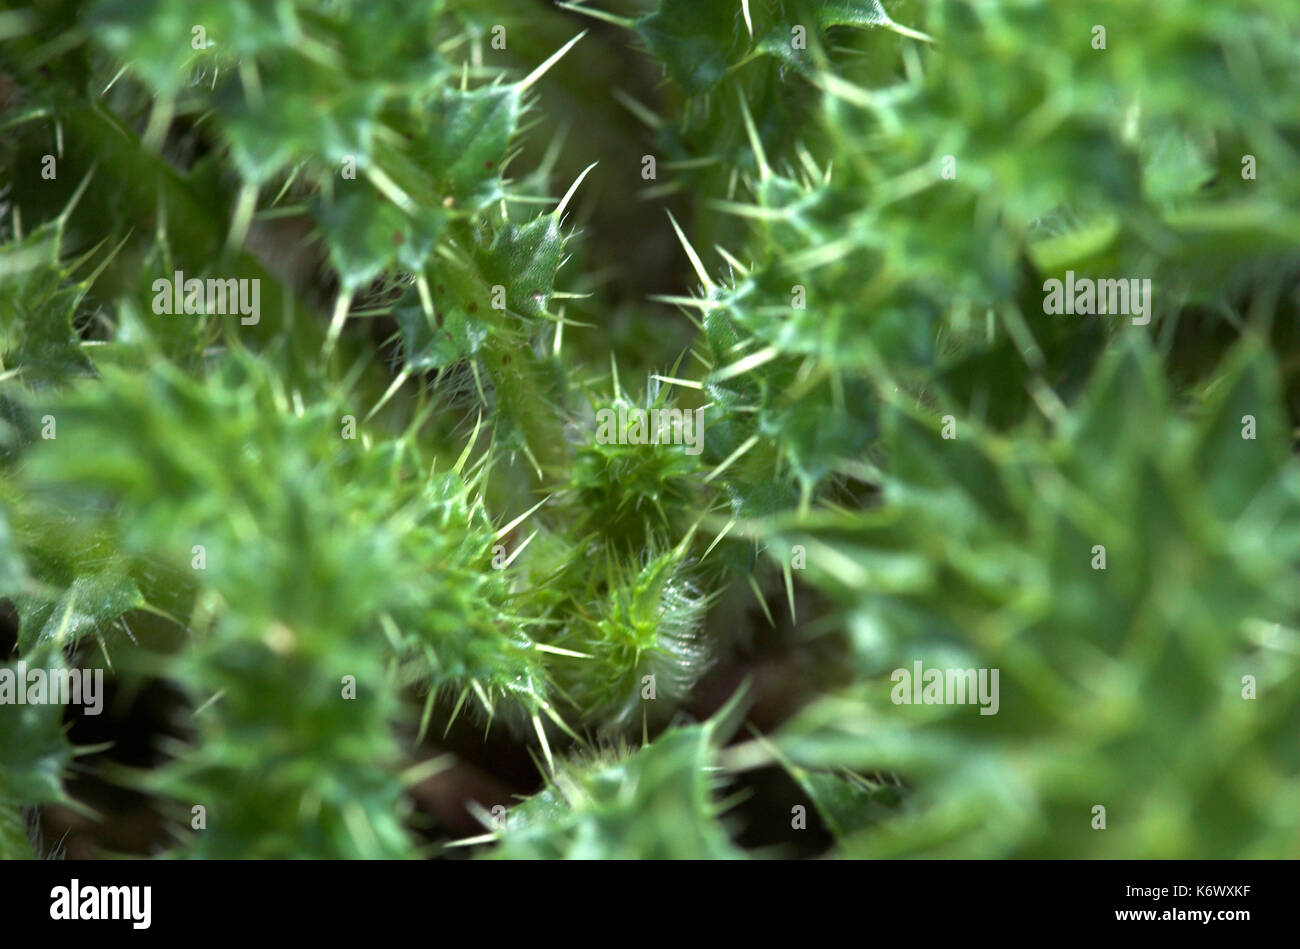 Spiny leaves of thistle, Kent, looking down, green, Stock Photo